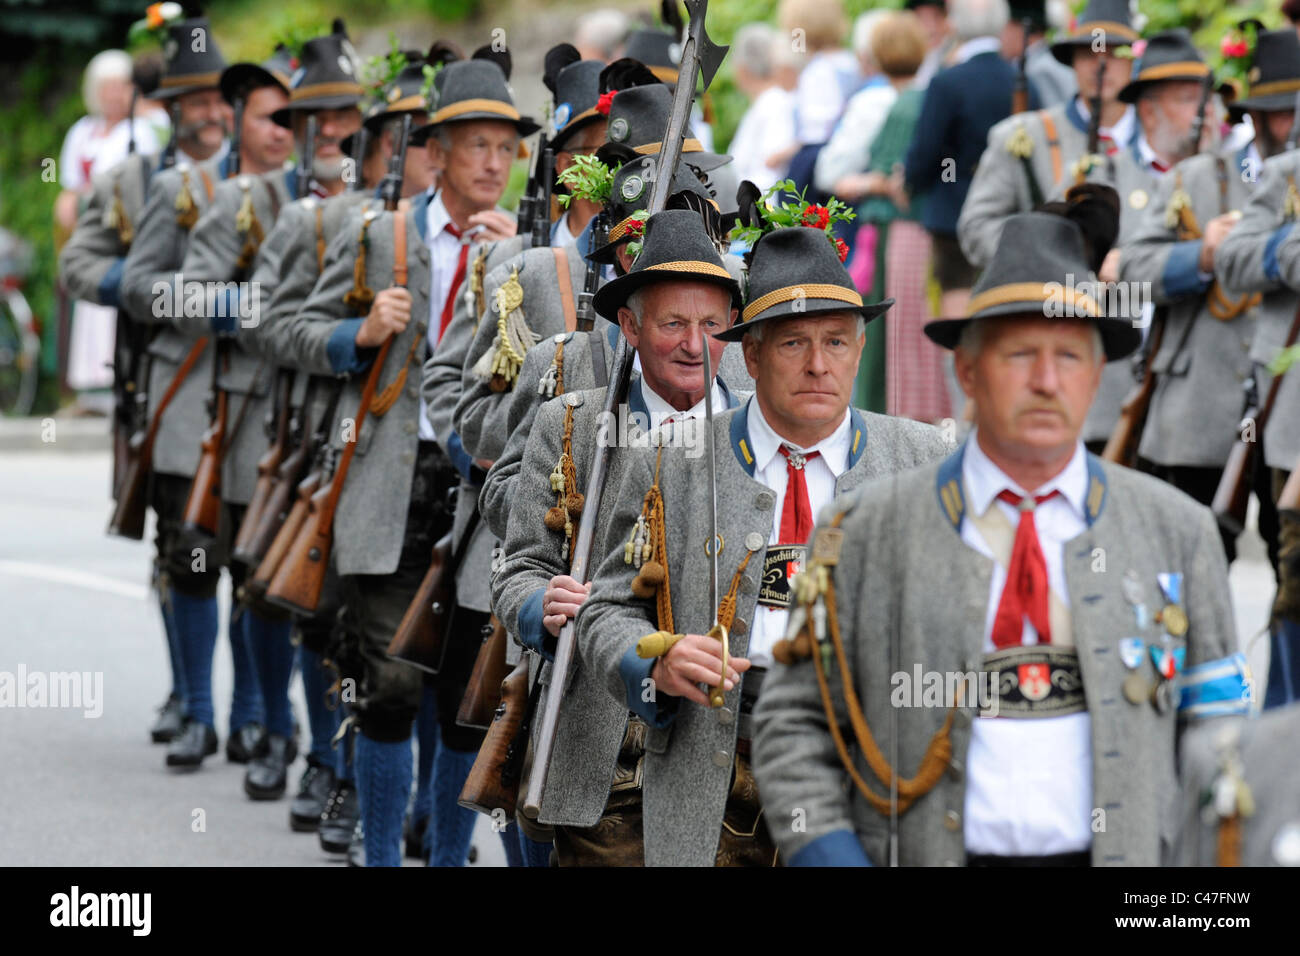 annual public parade of performers in historical costumes and old weapons in commemoration of ancient Bavarian soldiers Stock Photo